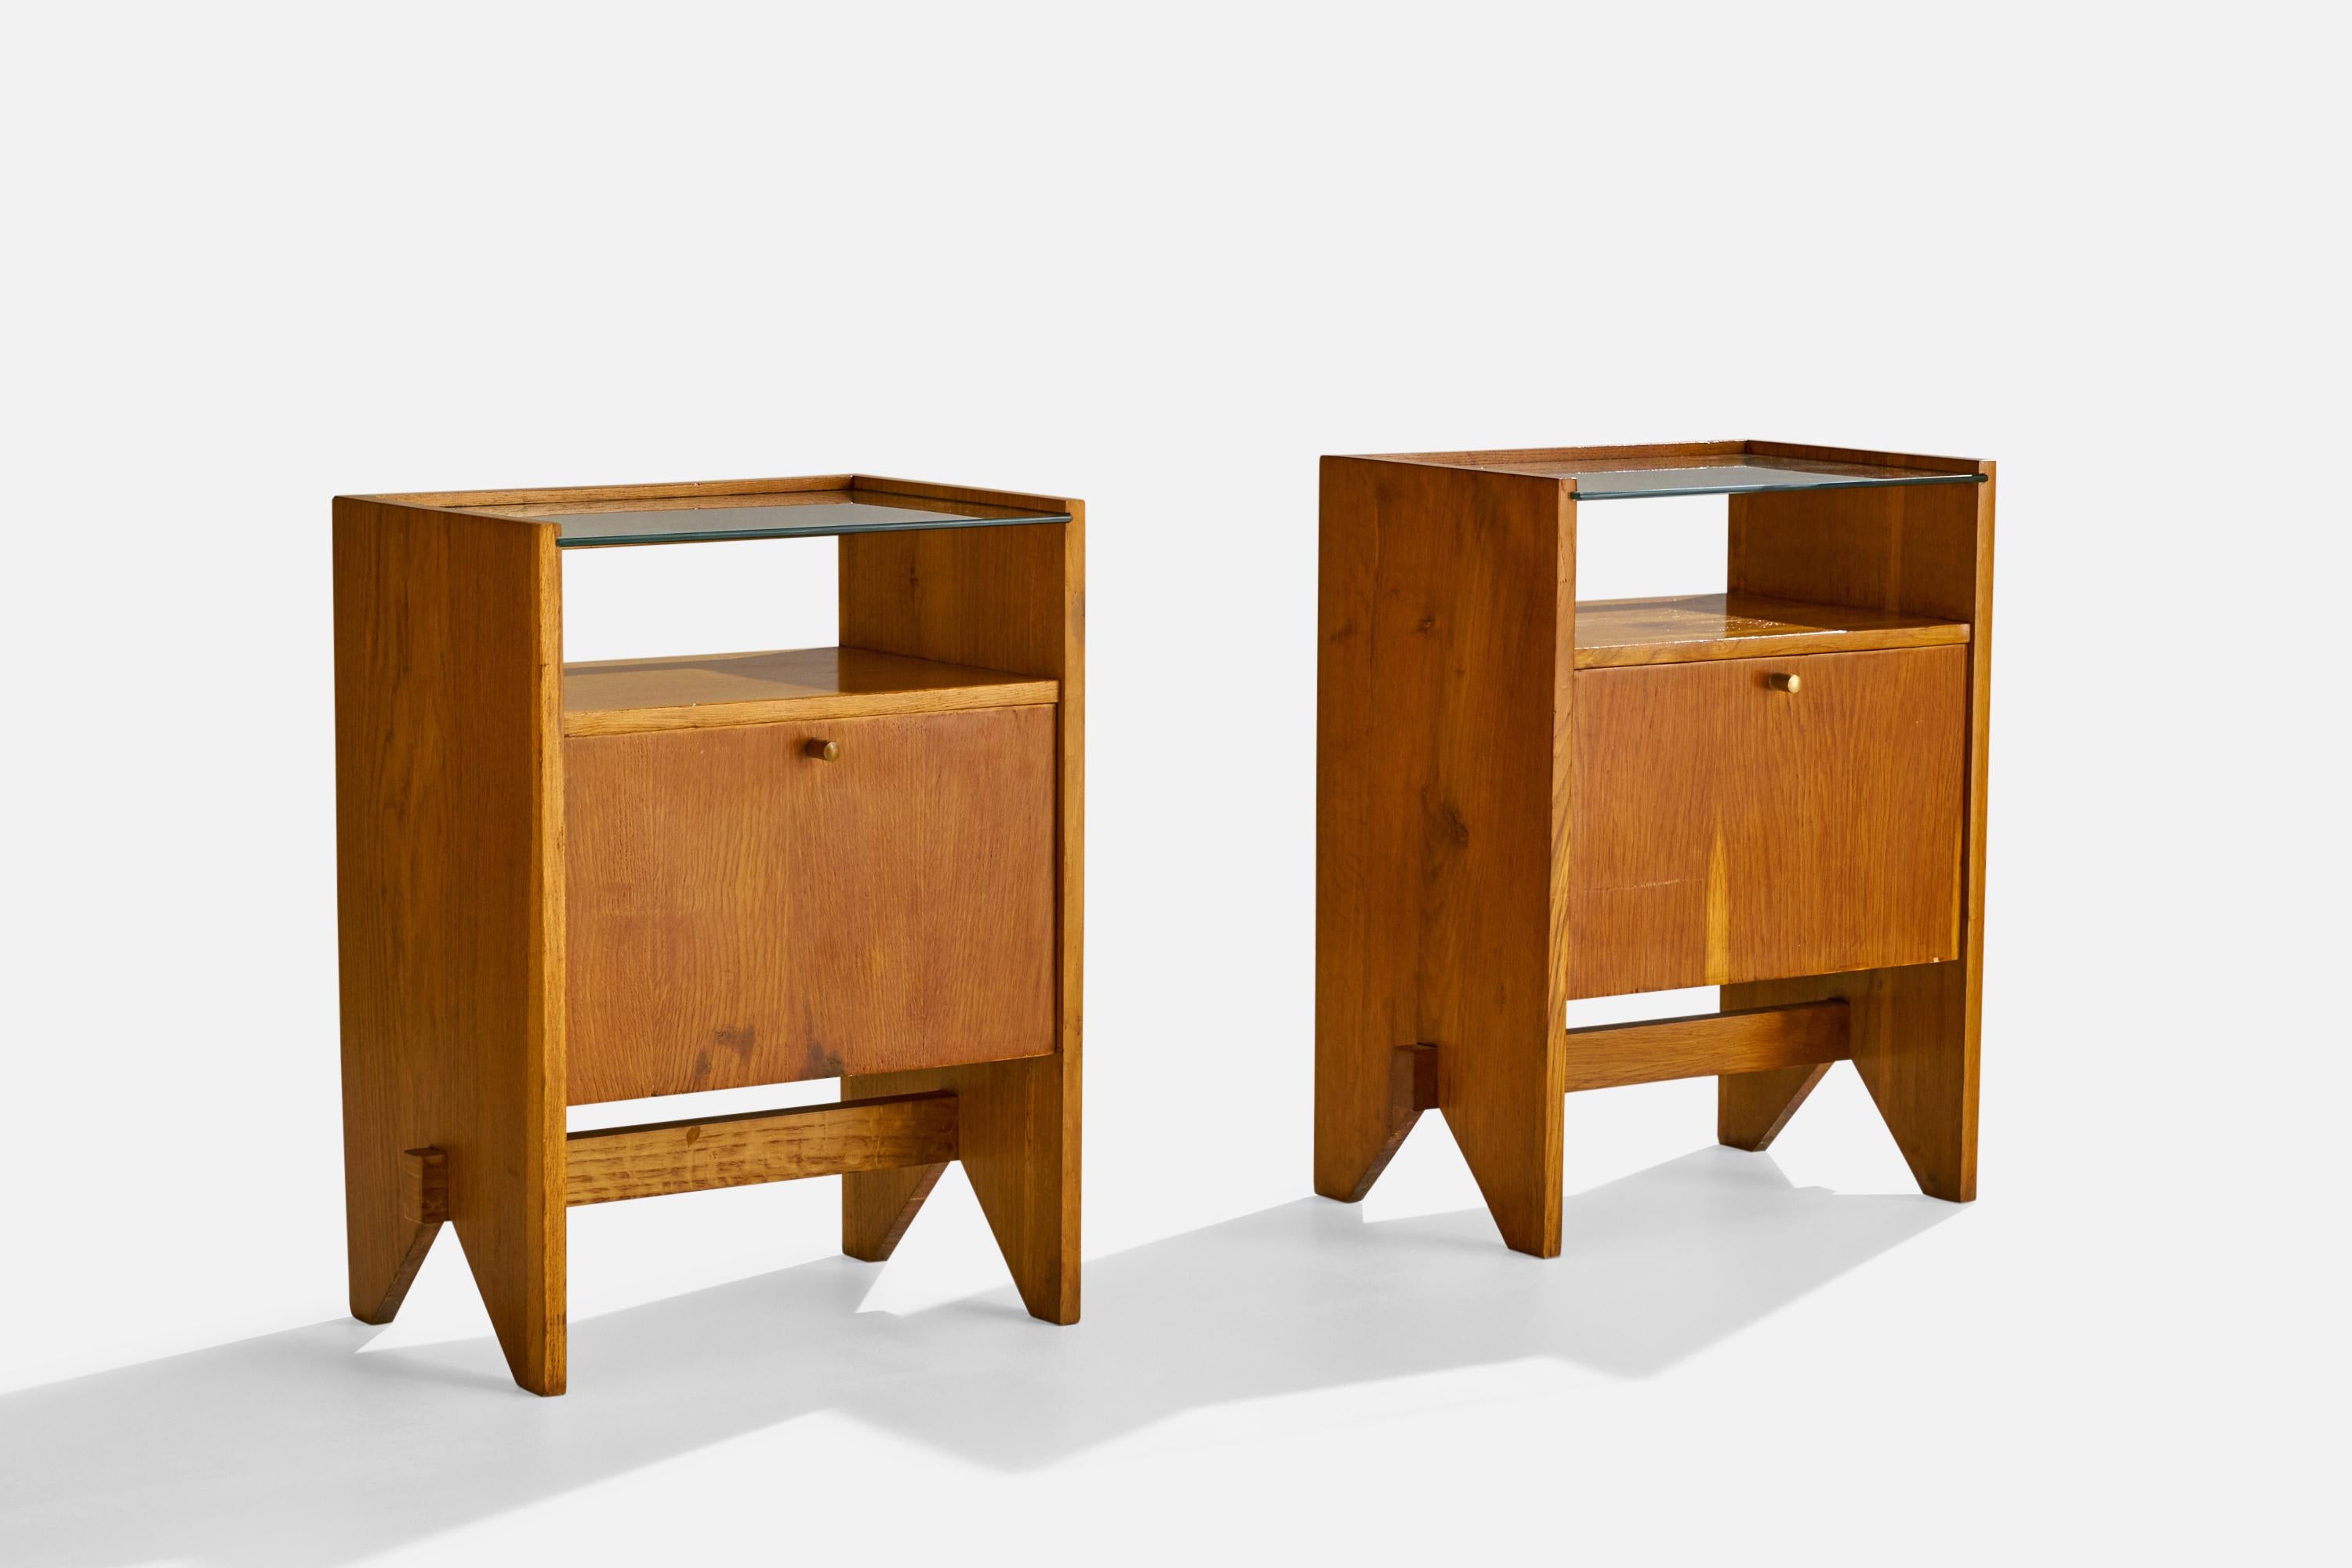 A pair of wood, glass and brass nightstands designed and produced by ISA Bergamo, Italy, c. 1950s.